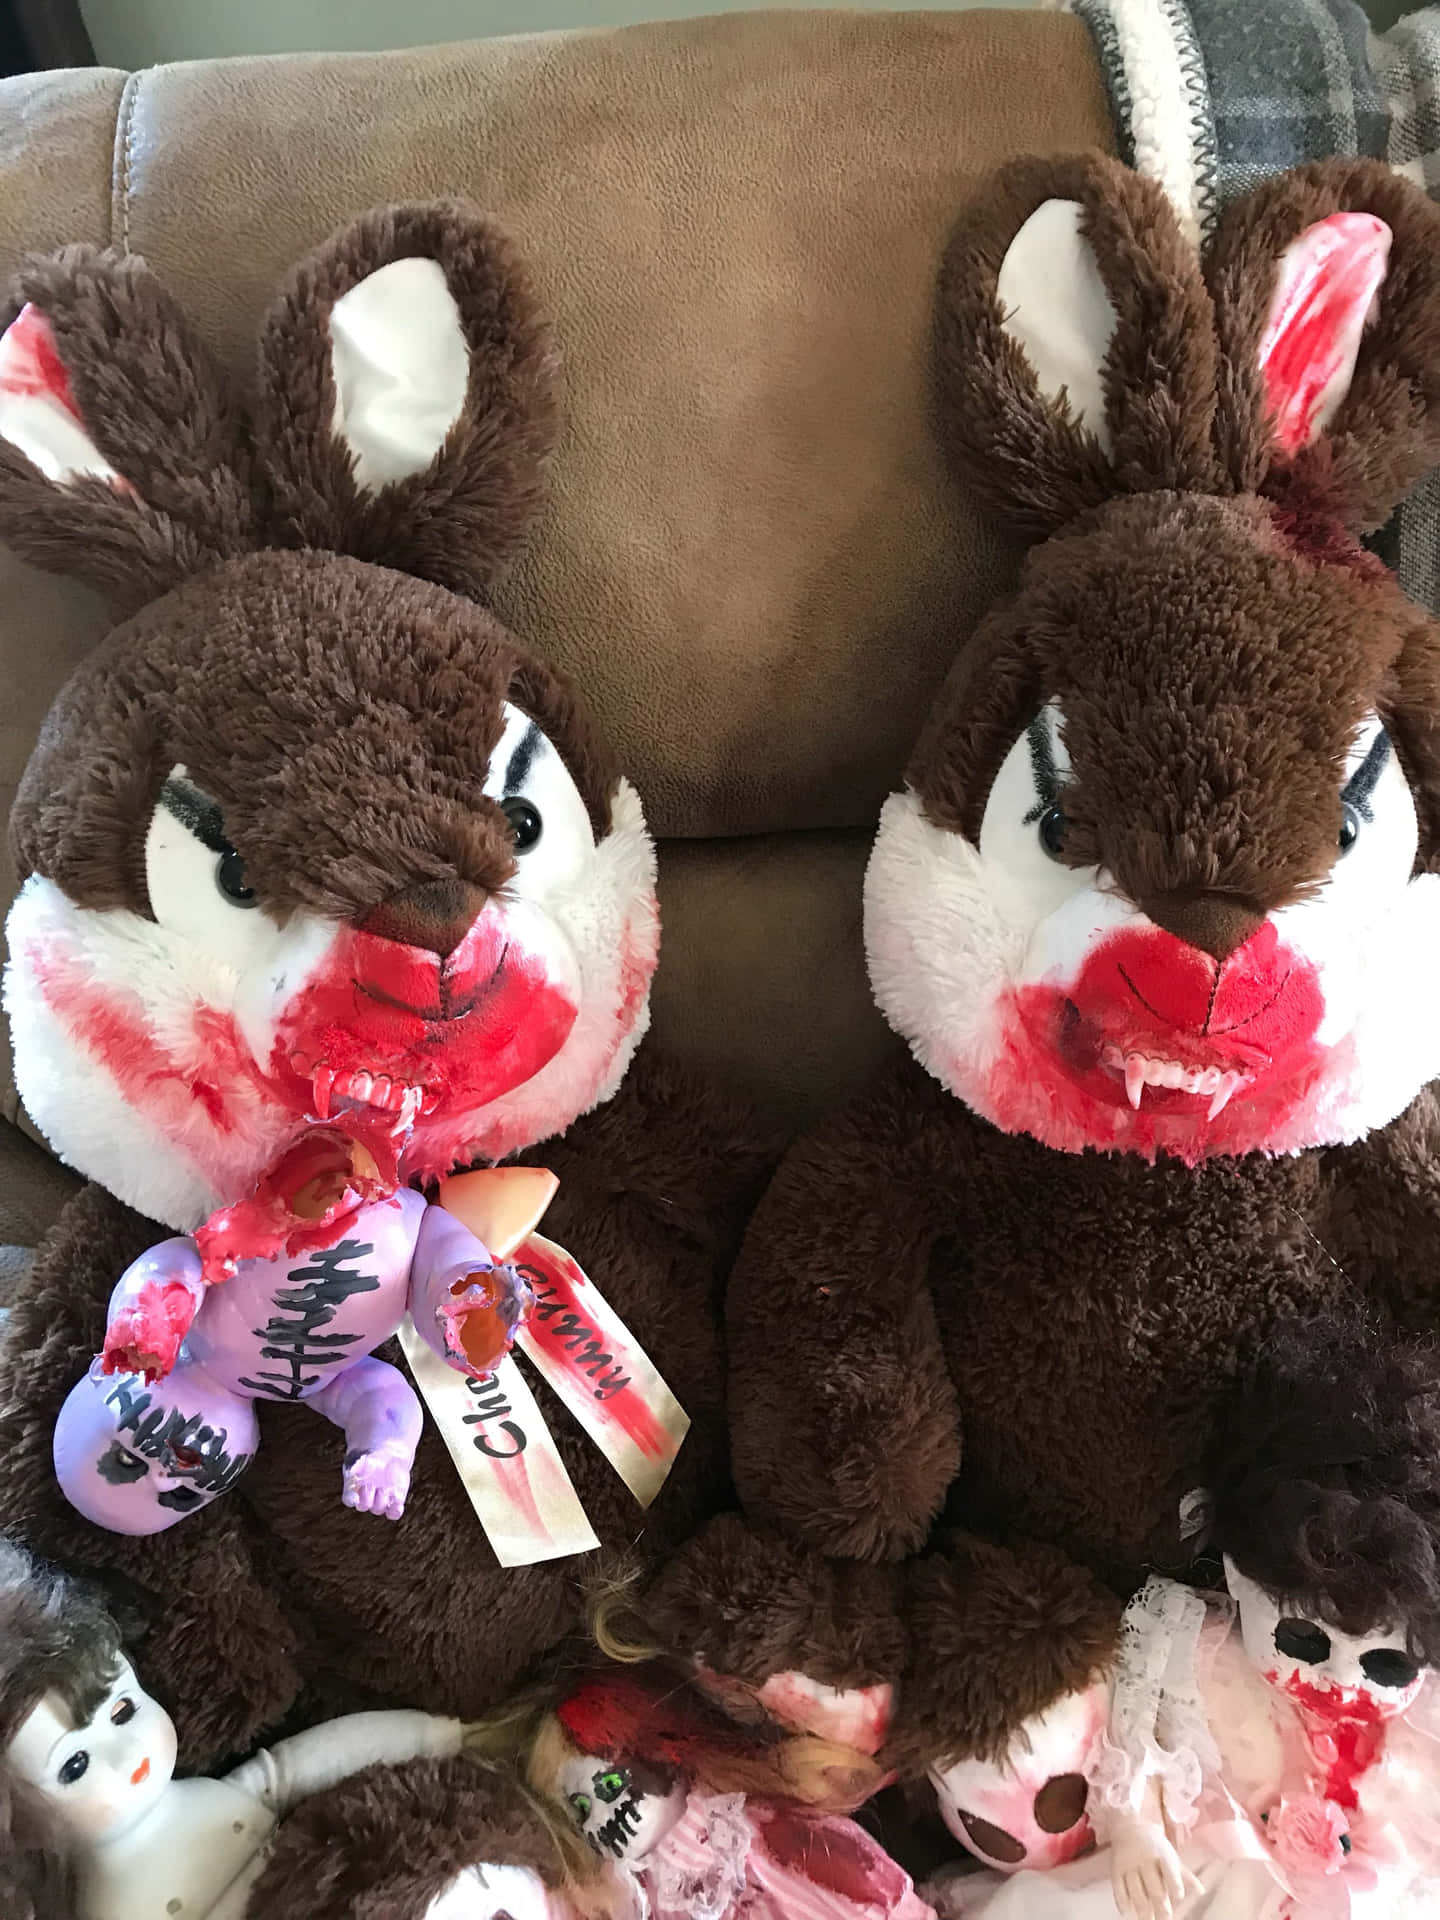 Two Stuffed Animals With Blood On Their Faces